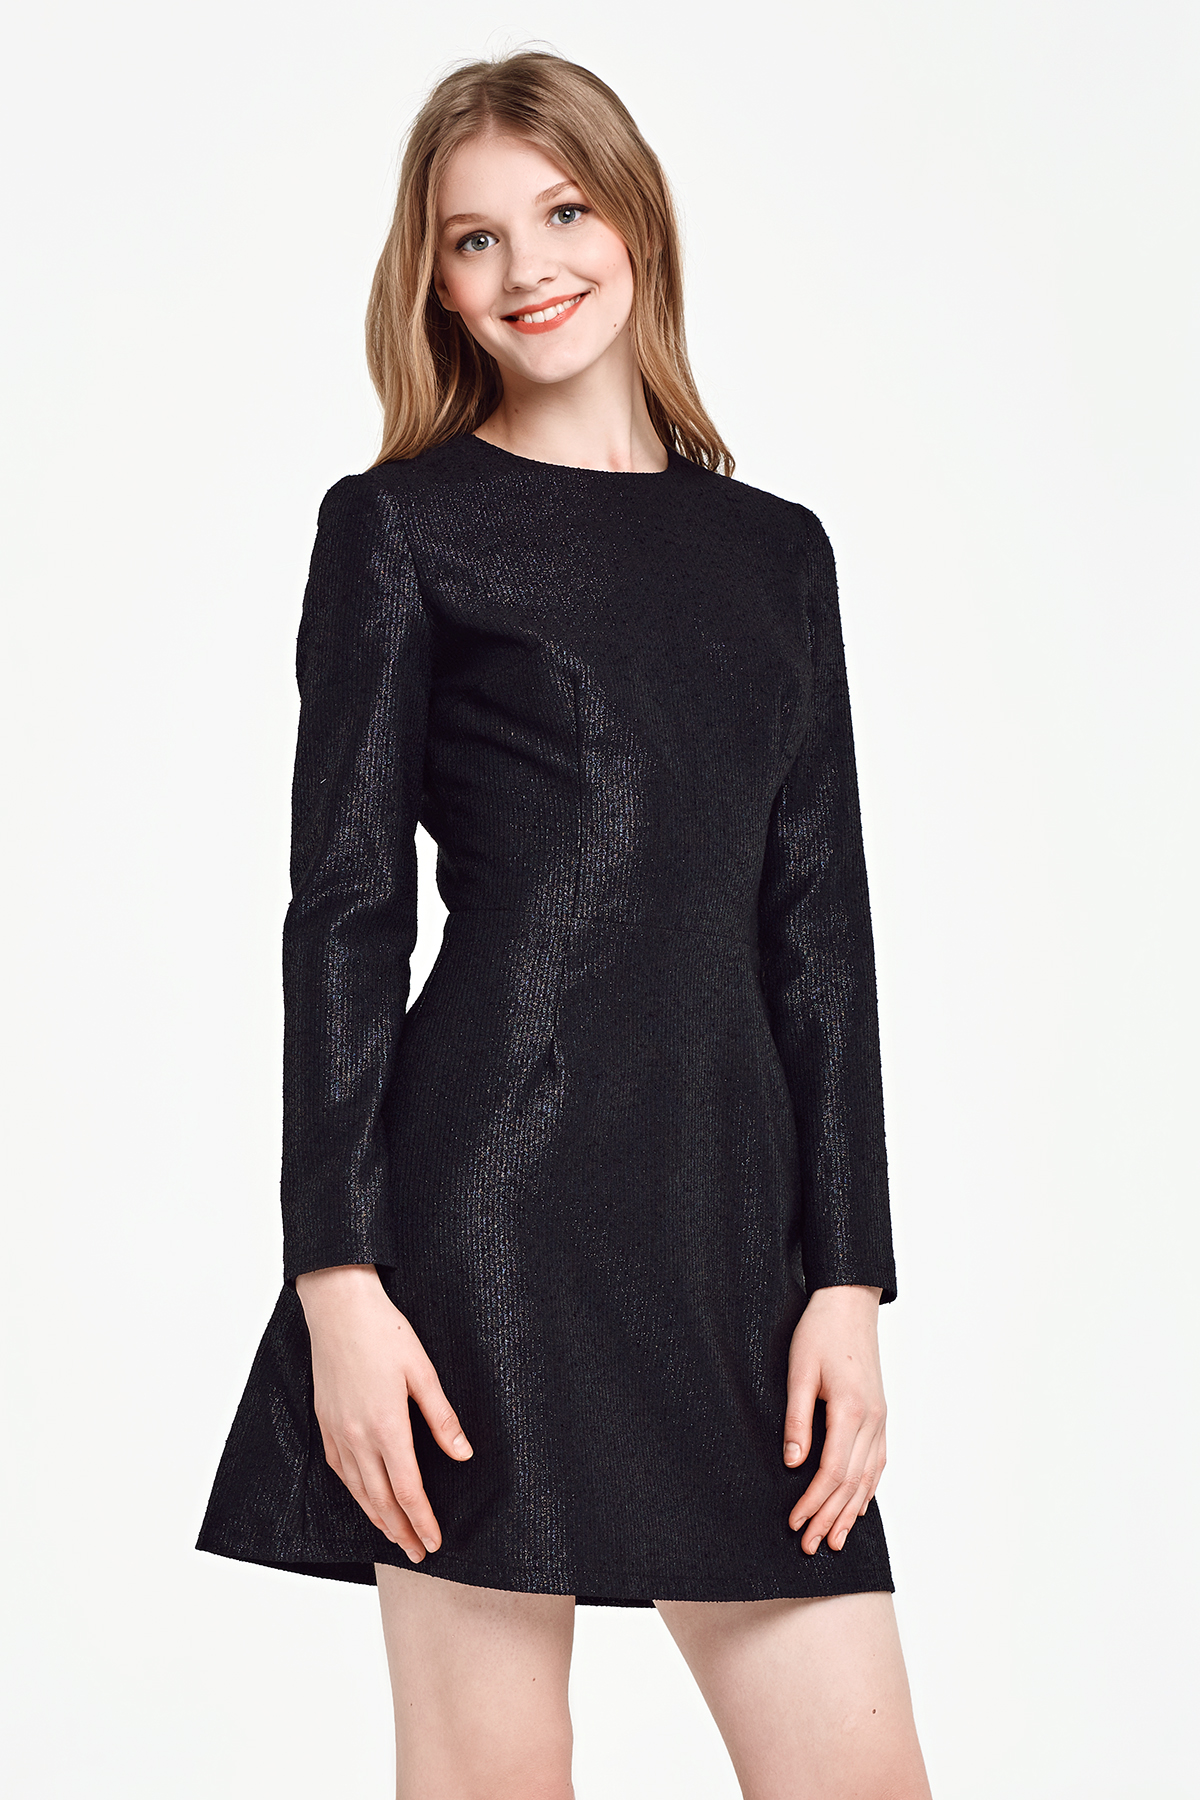 Above the knee A-line black dress with lurex , photo 1